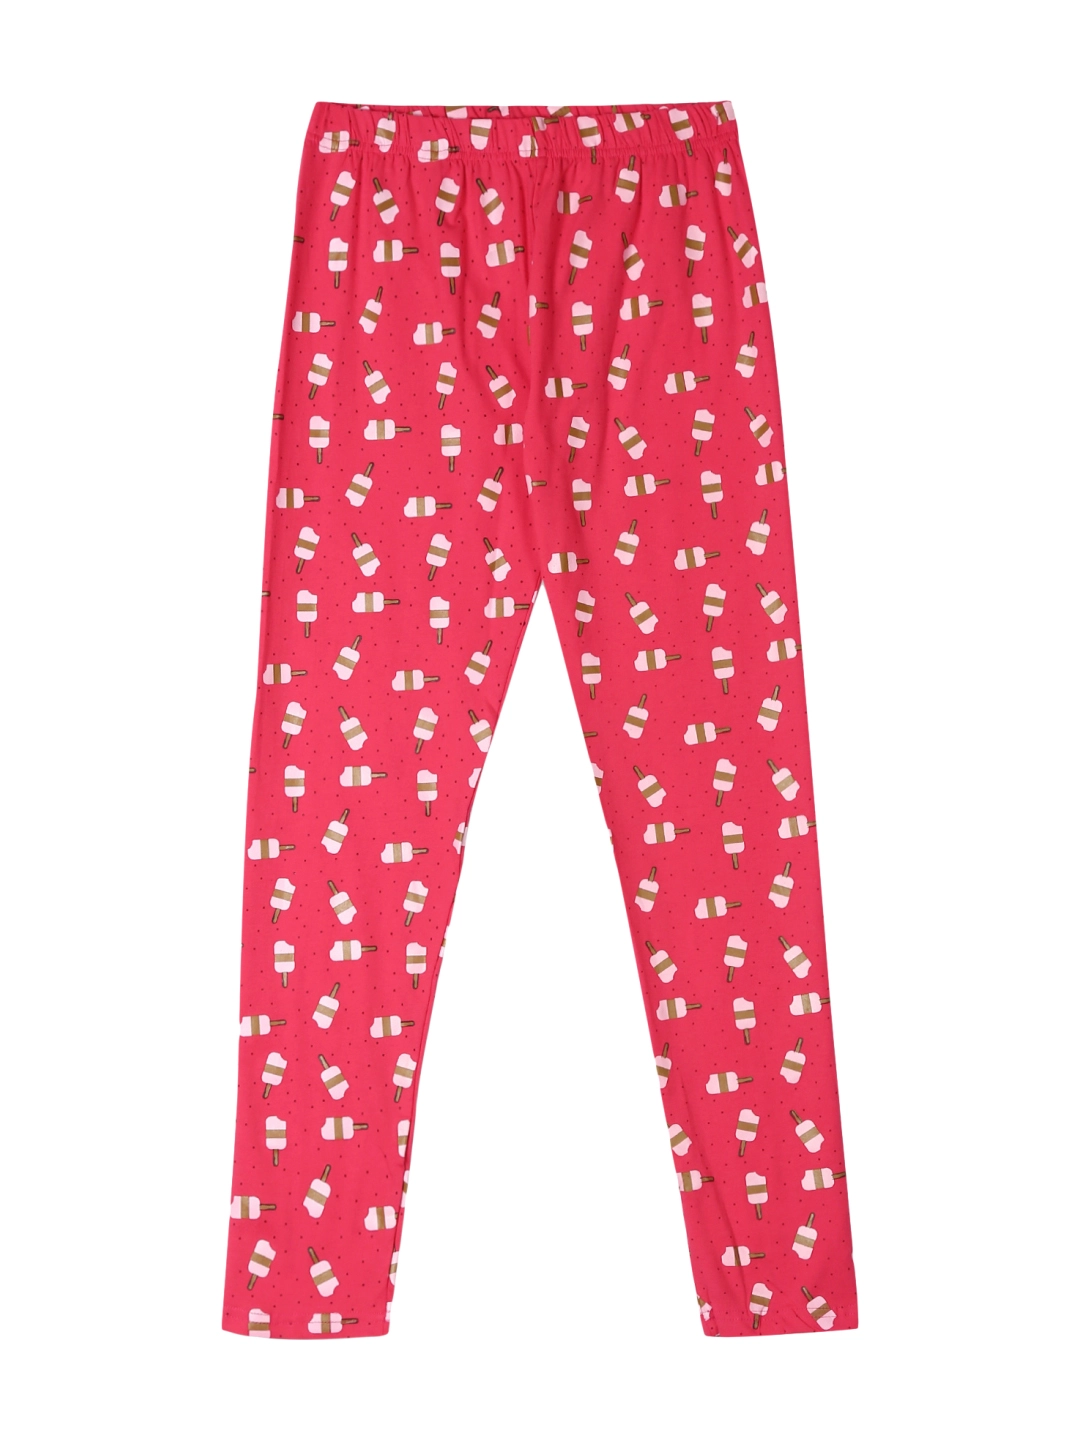 Printed Pants Made In Bangladesh Wholesale Suppliers